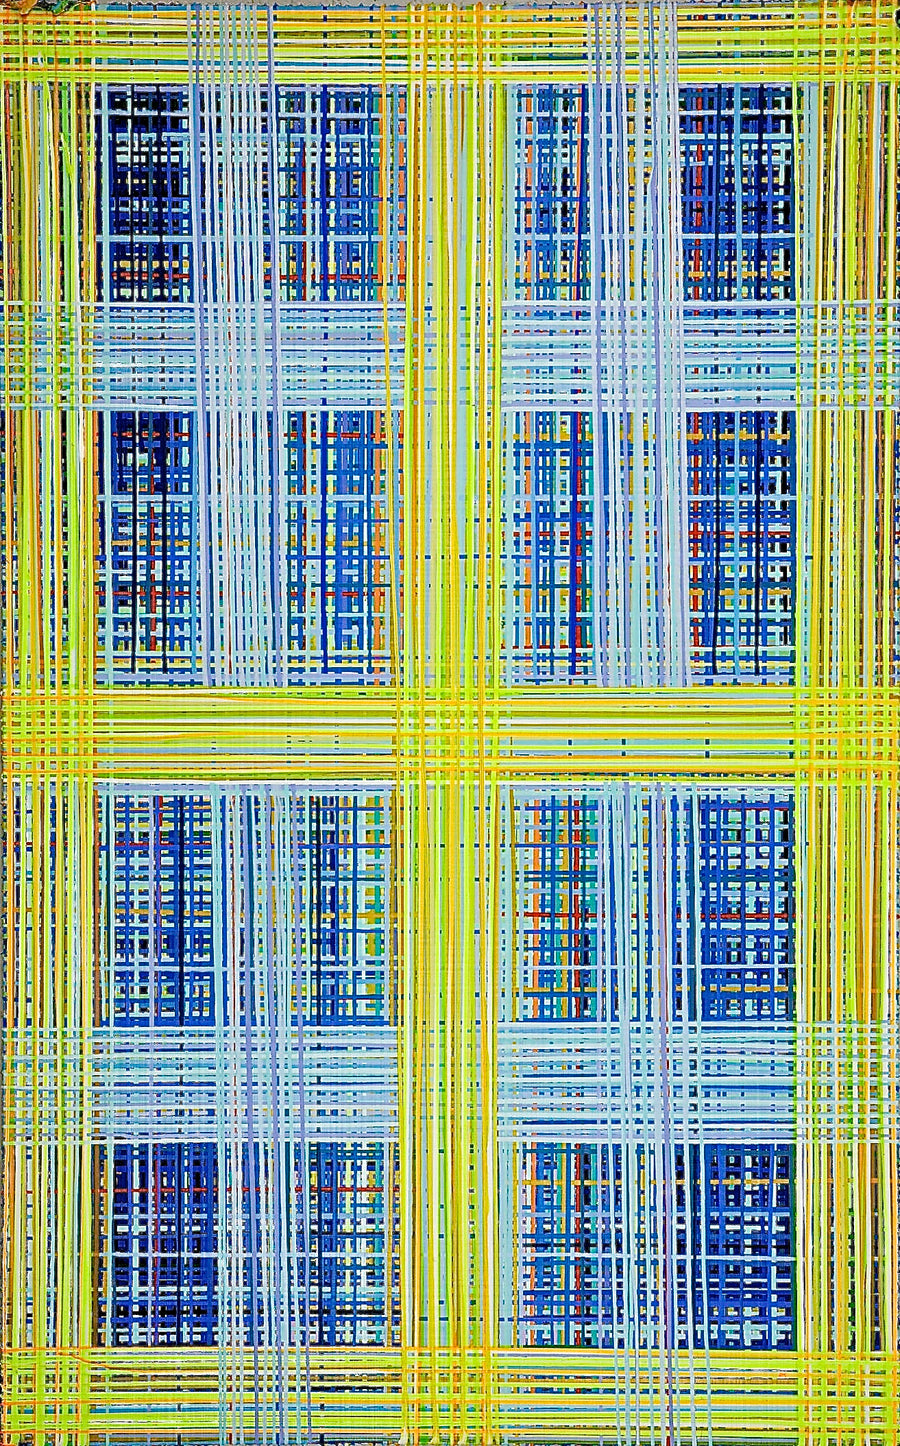 Green and blue abstract drip painting in plaid pattern by New York artist Jon James. Available through art gallery Tuleste Factory in Chelsea NYC.